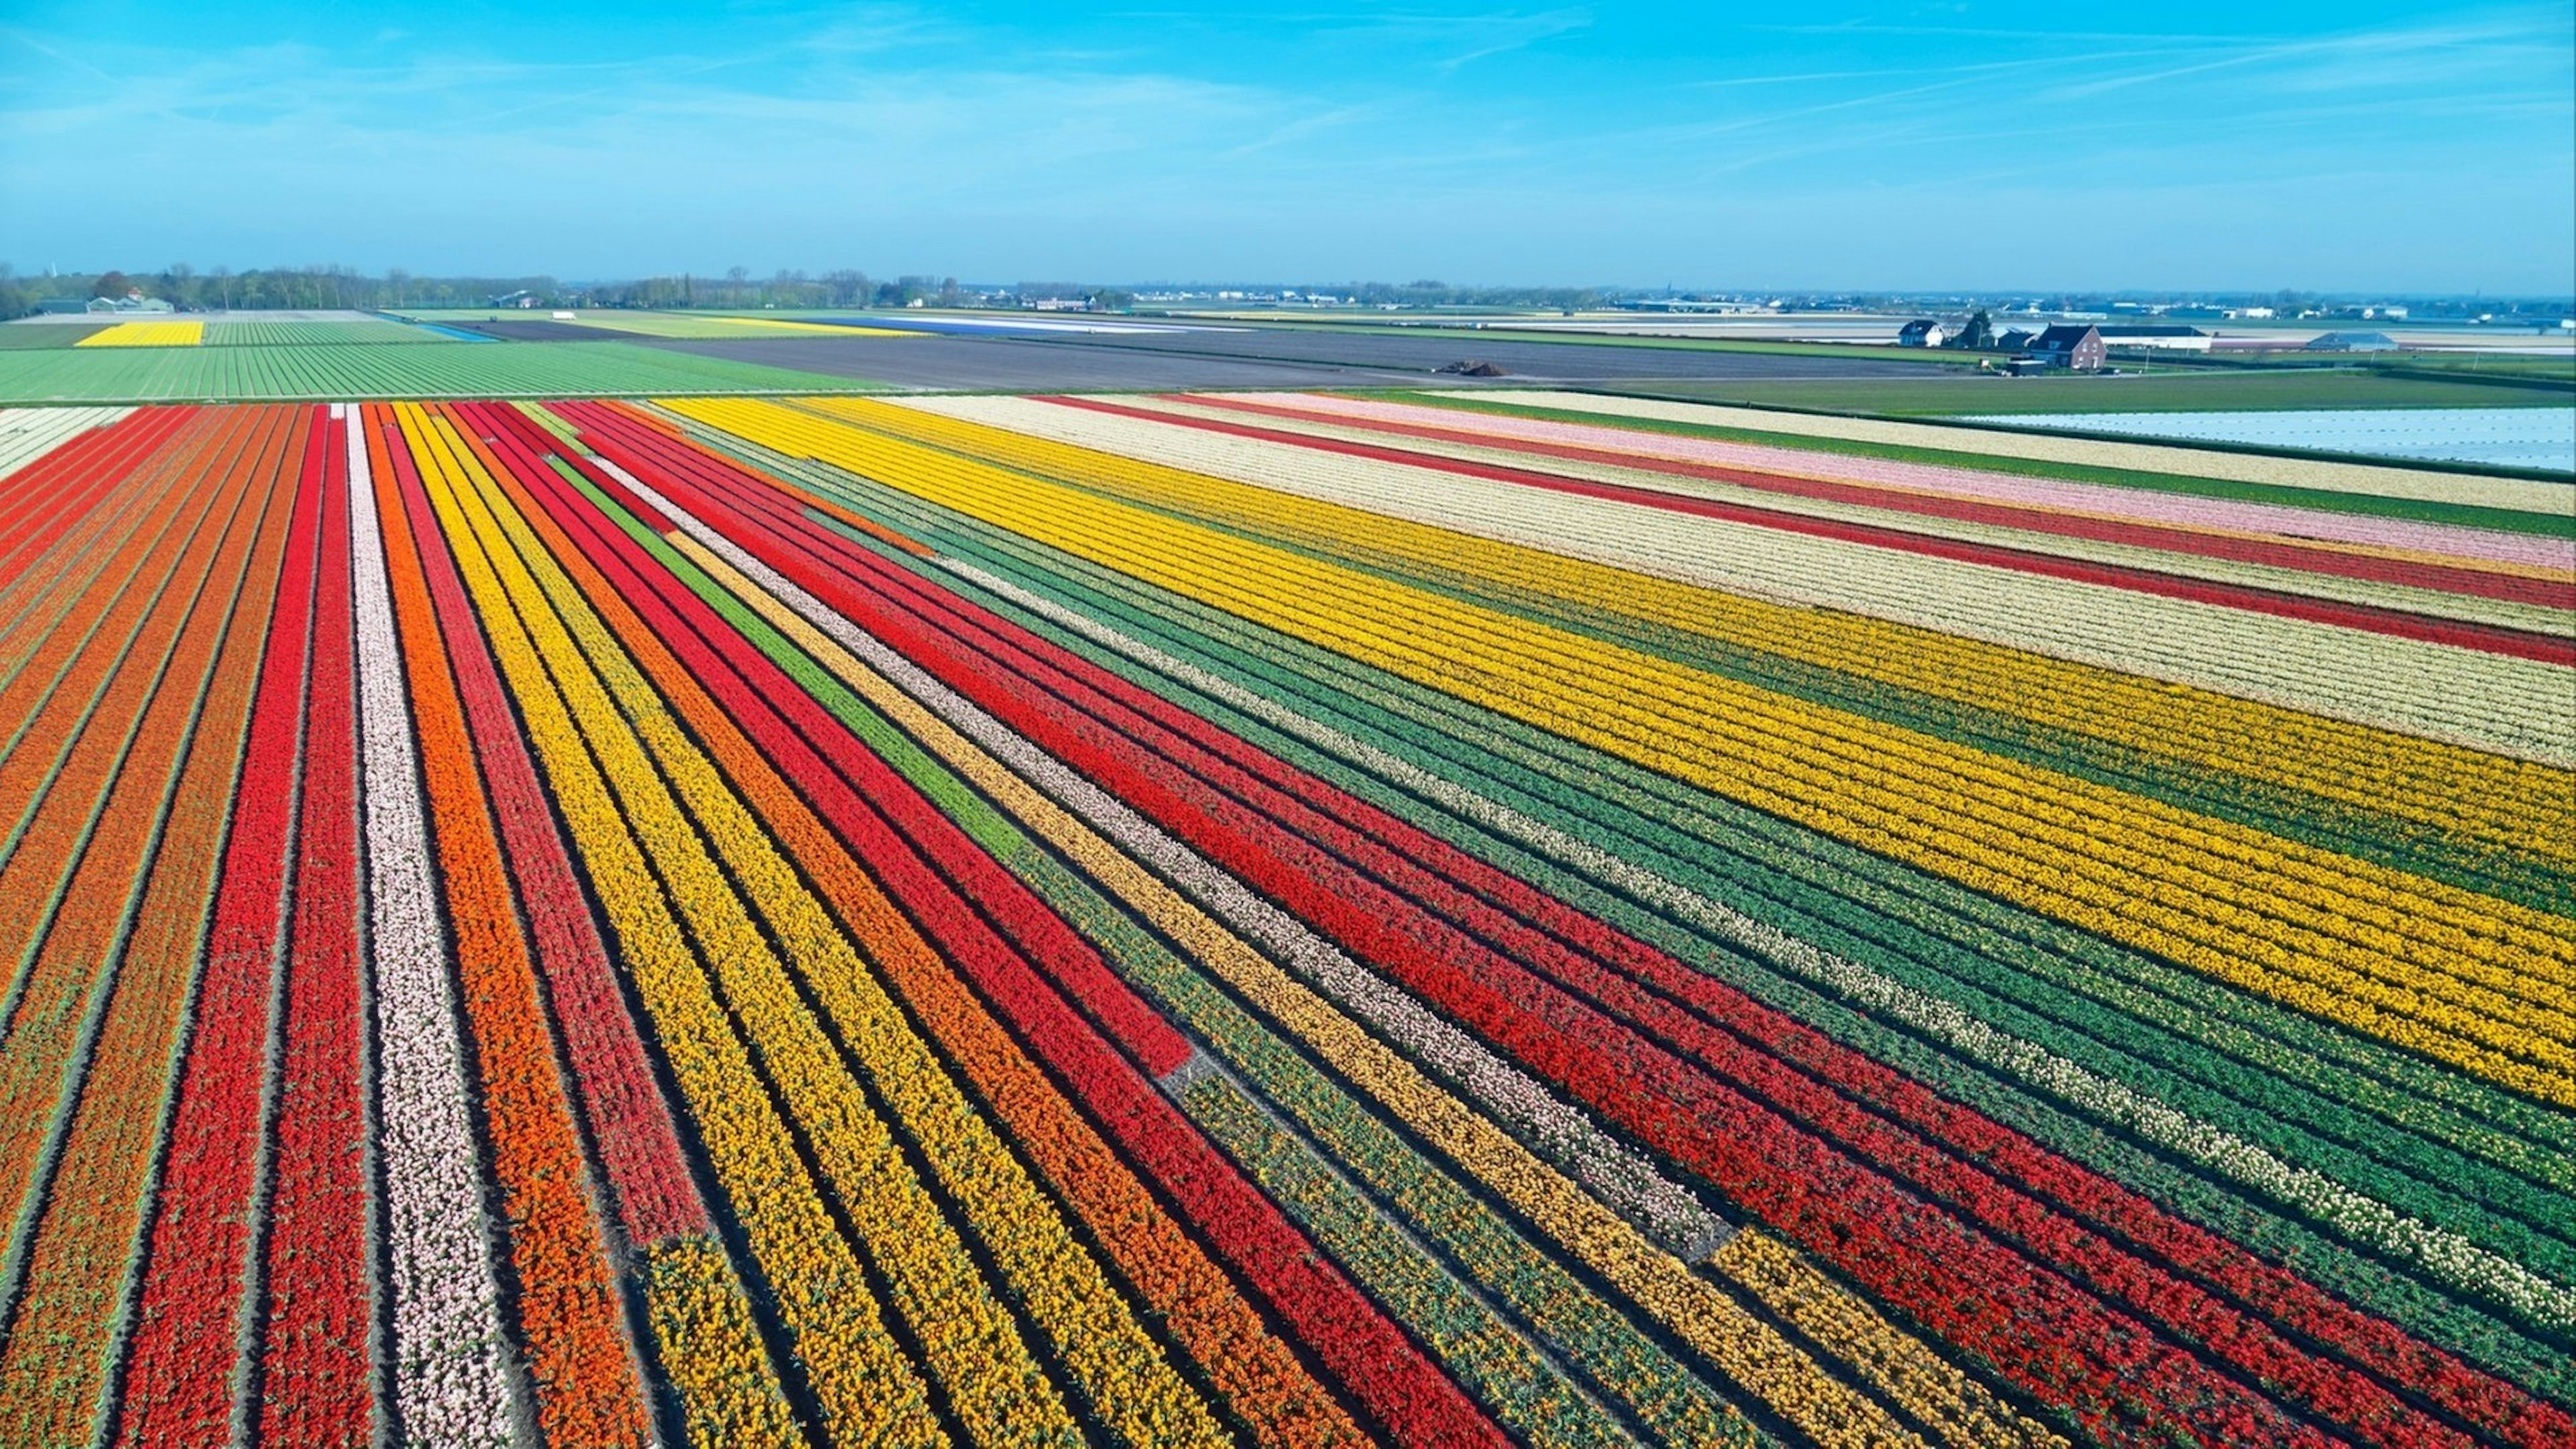 Aerial view of bulb-fields in springtime, located between the towns of Lisse and Sassenheim